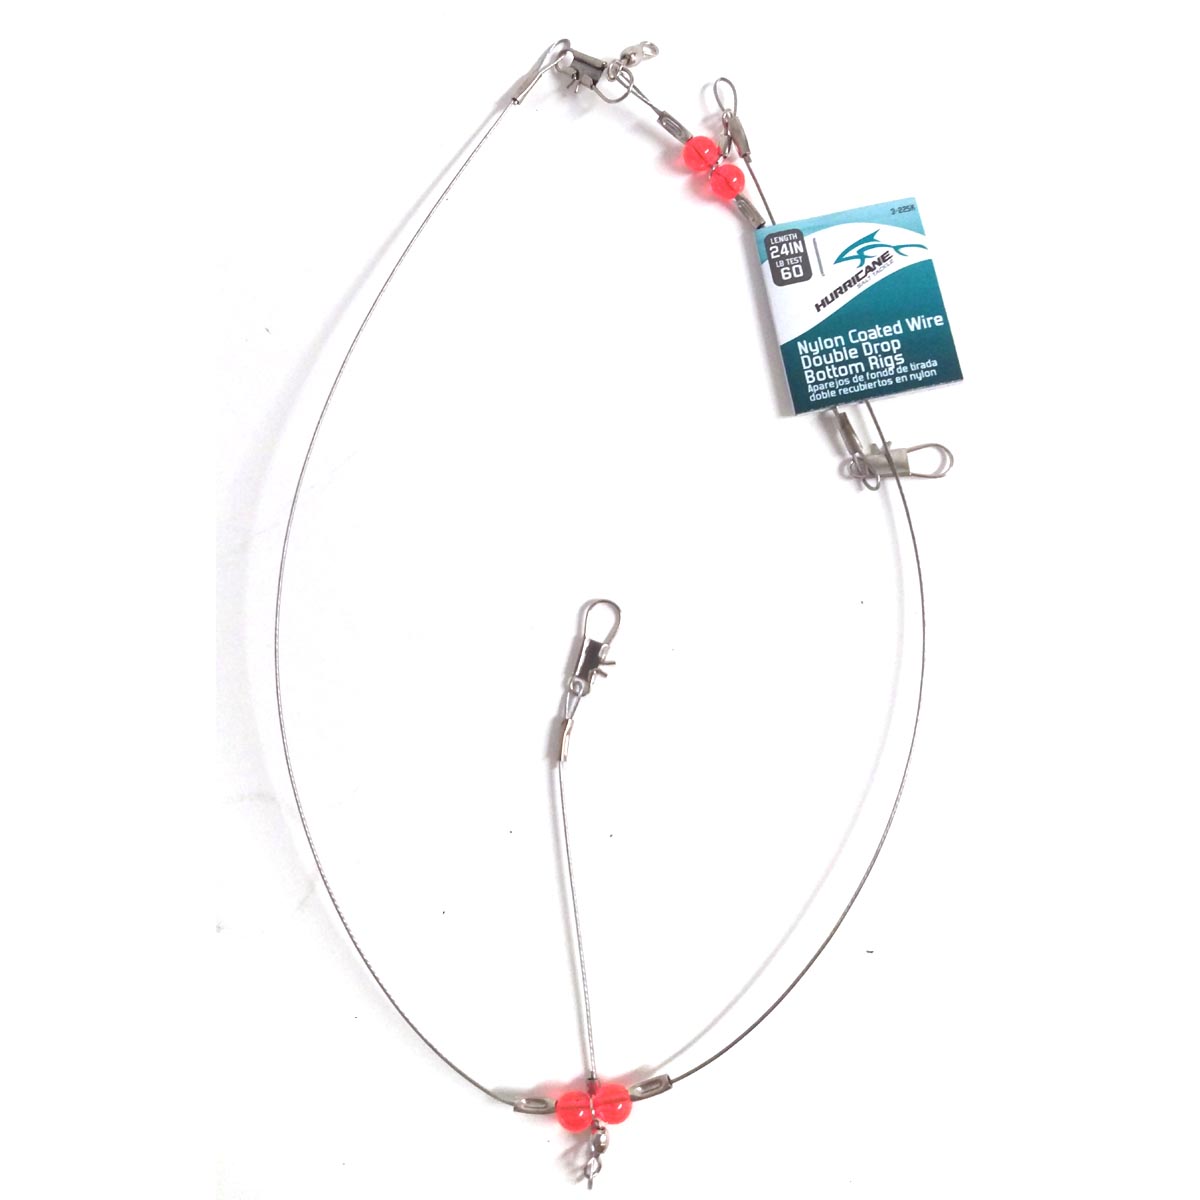 Hurricane Double Drop Rig Wire Coated, 24 pouces, Liban